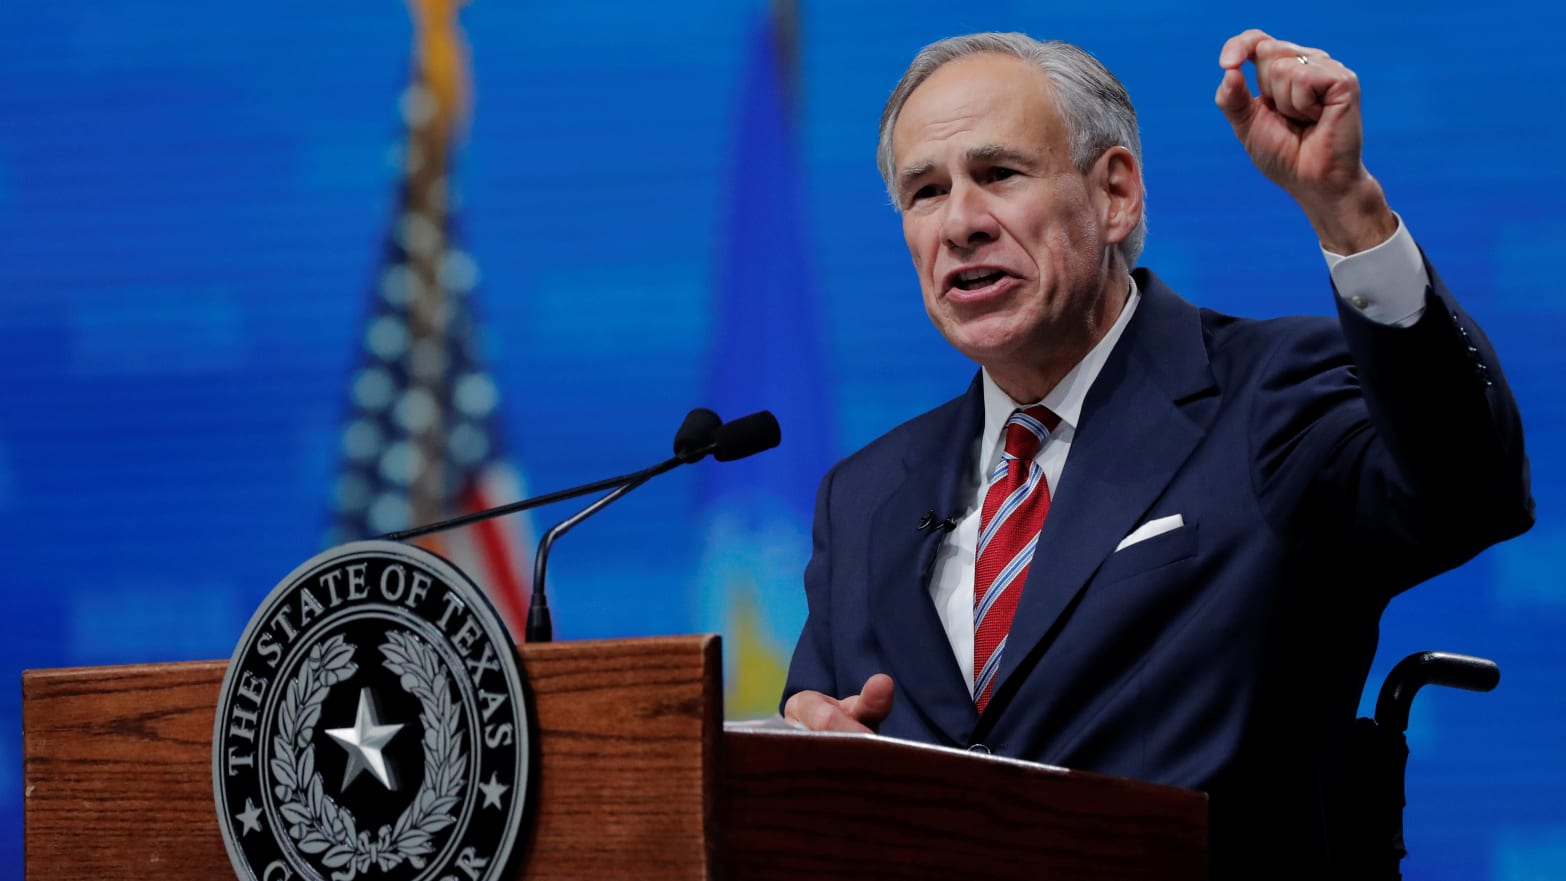 Texas Governor Greg Abbott speaks at the annual National Rifle Association (NRA) convention in Dallas, Texas, U.S., May 4, 2018.